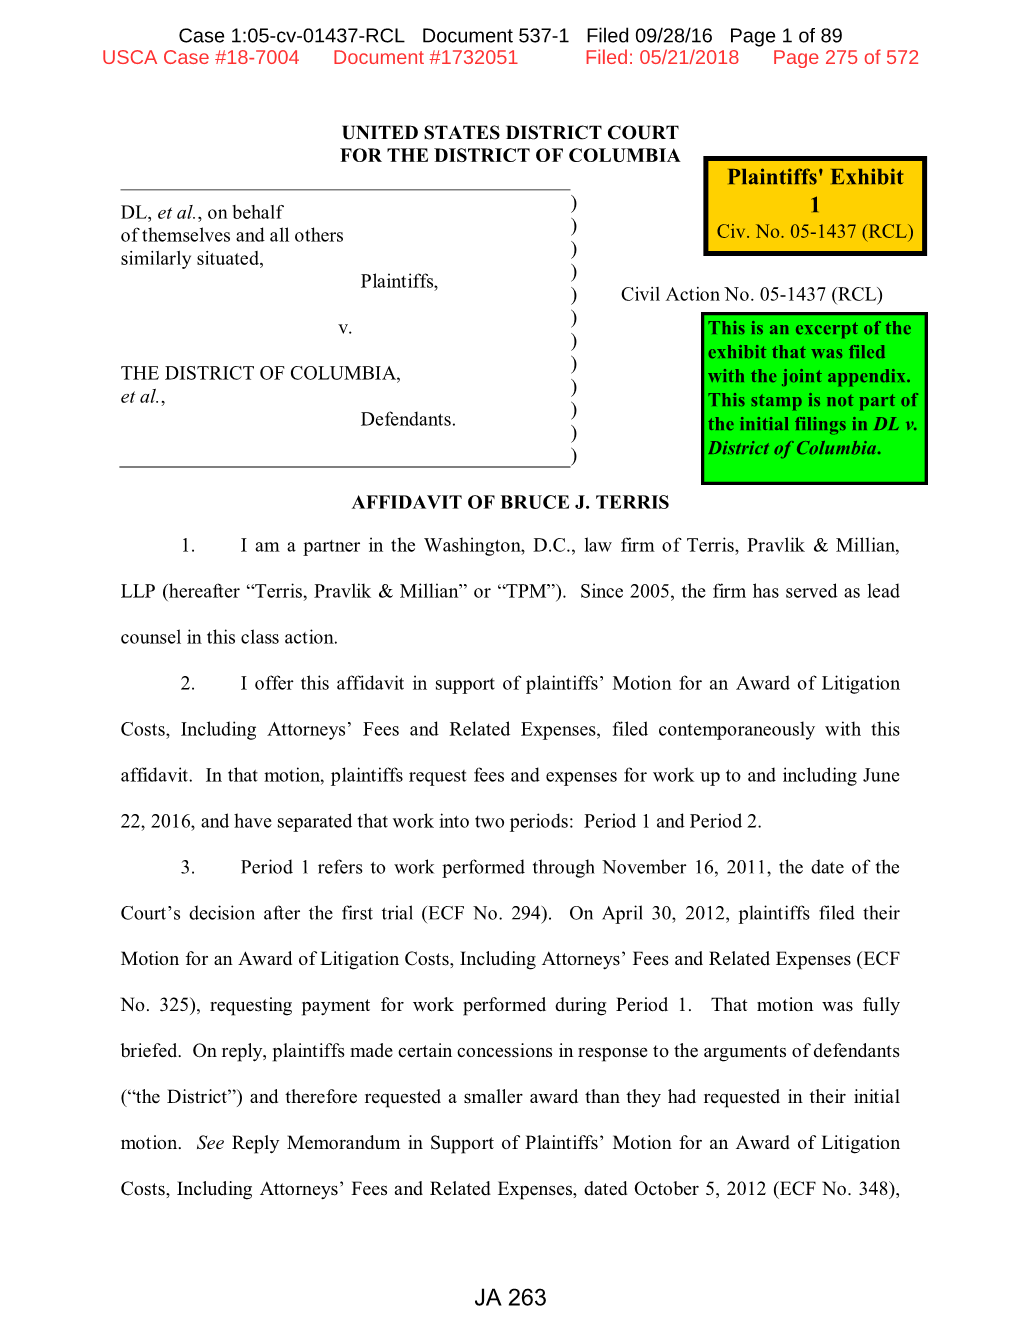 USCA Case #18-7004 Document #1732051 Filed: 05/21/2018 Page 275 of 572